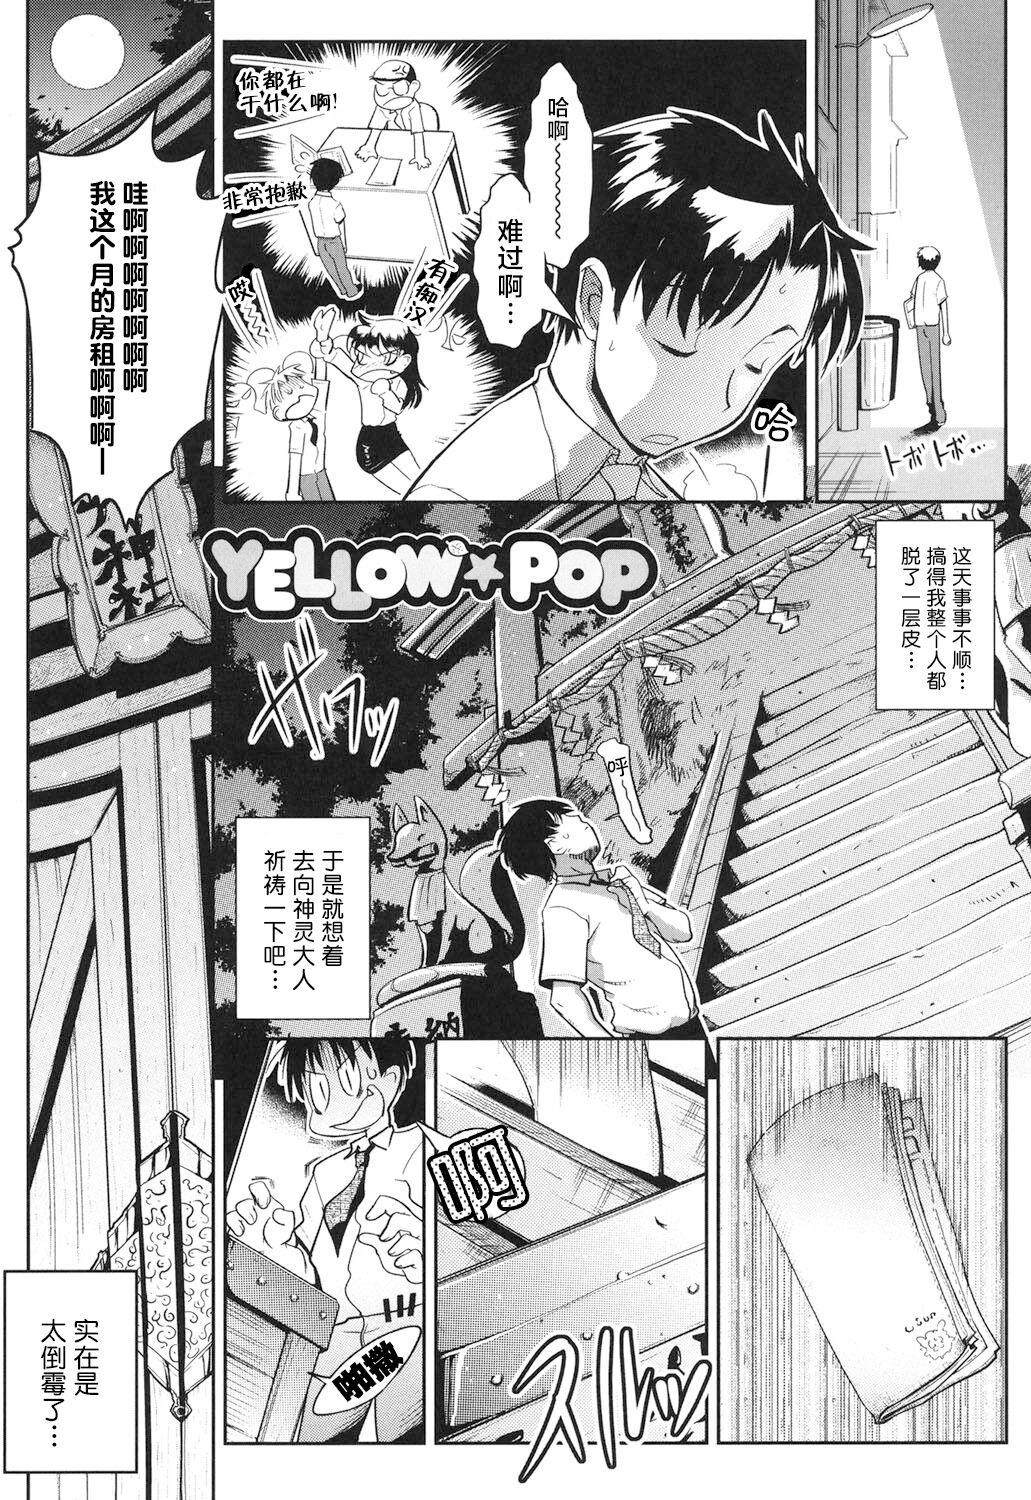 Climax YELLOW★POP Ch. 1 Dance - Picture 2